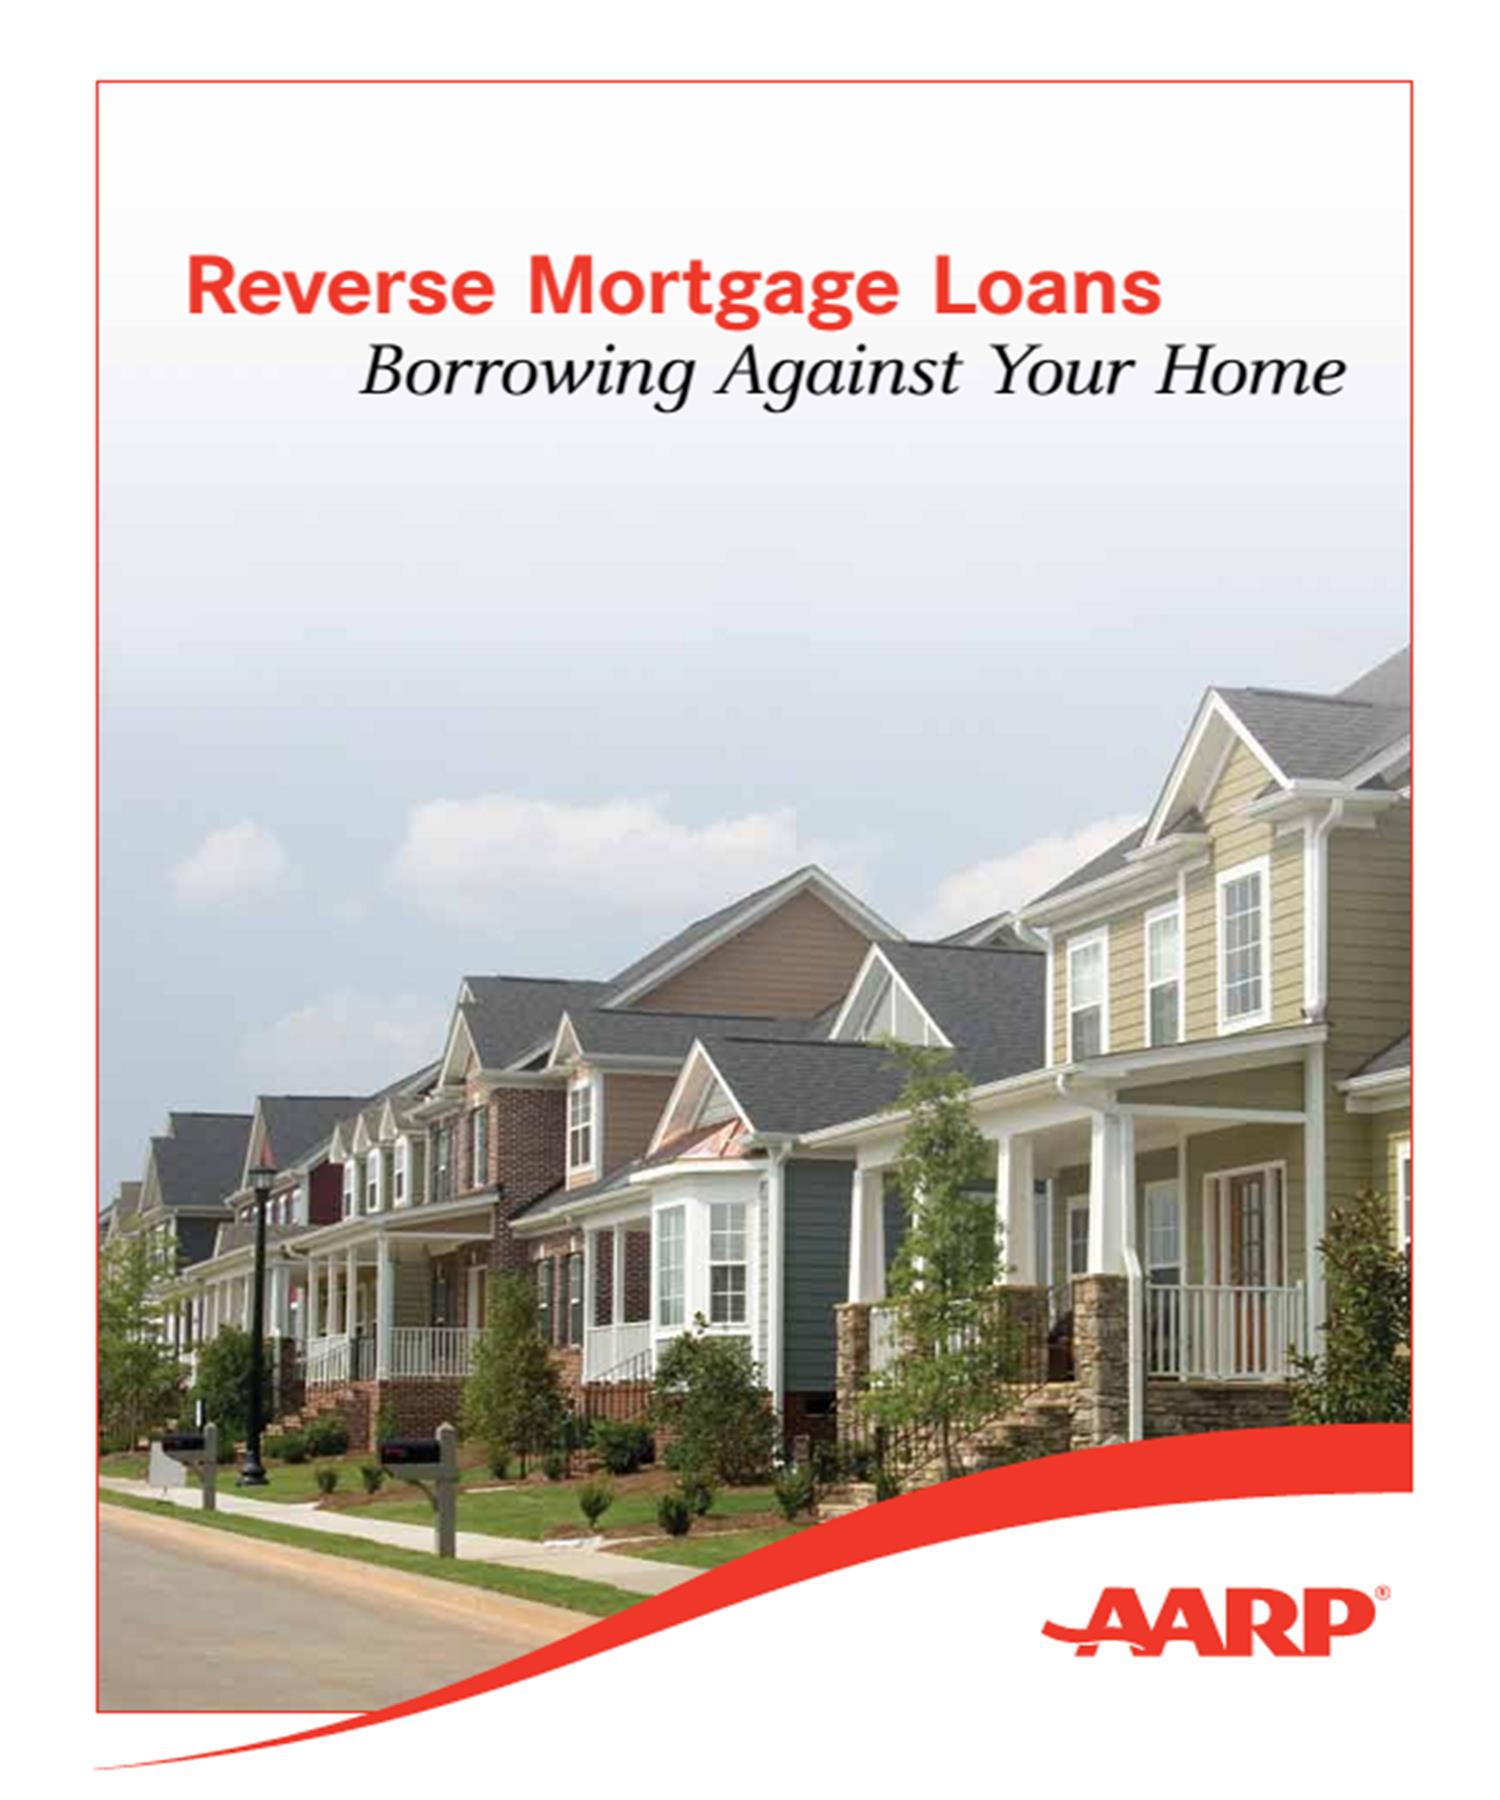 AARP reverse mortgage information boise nampa caldwell